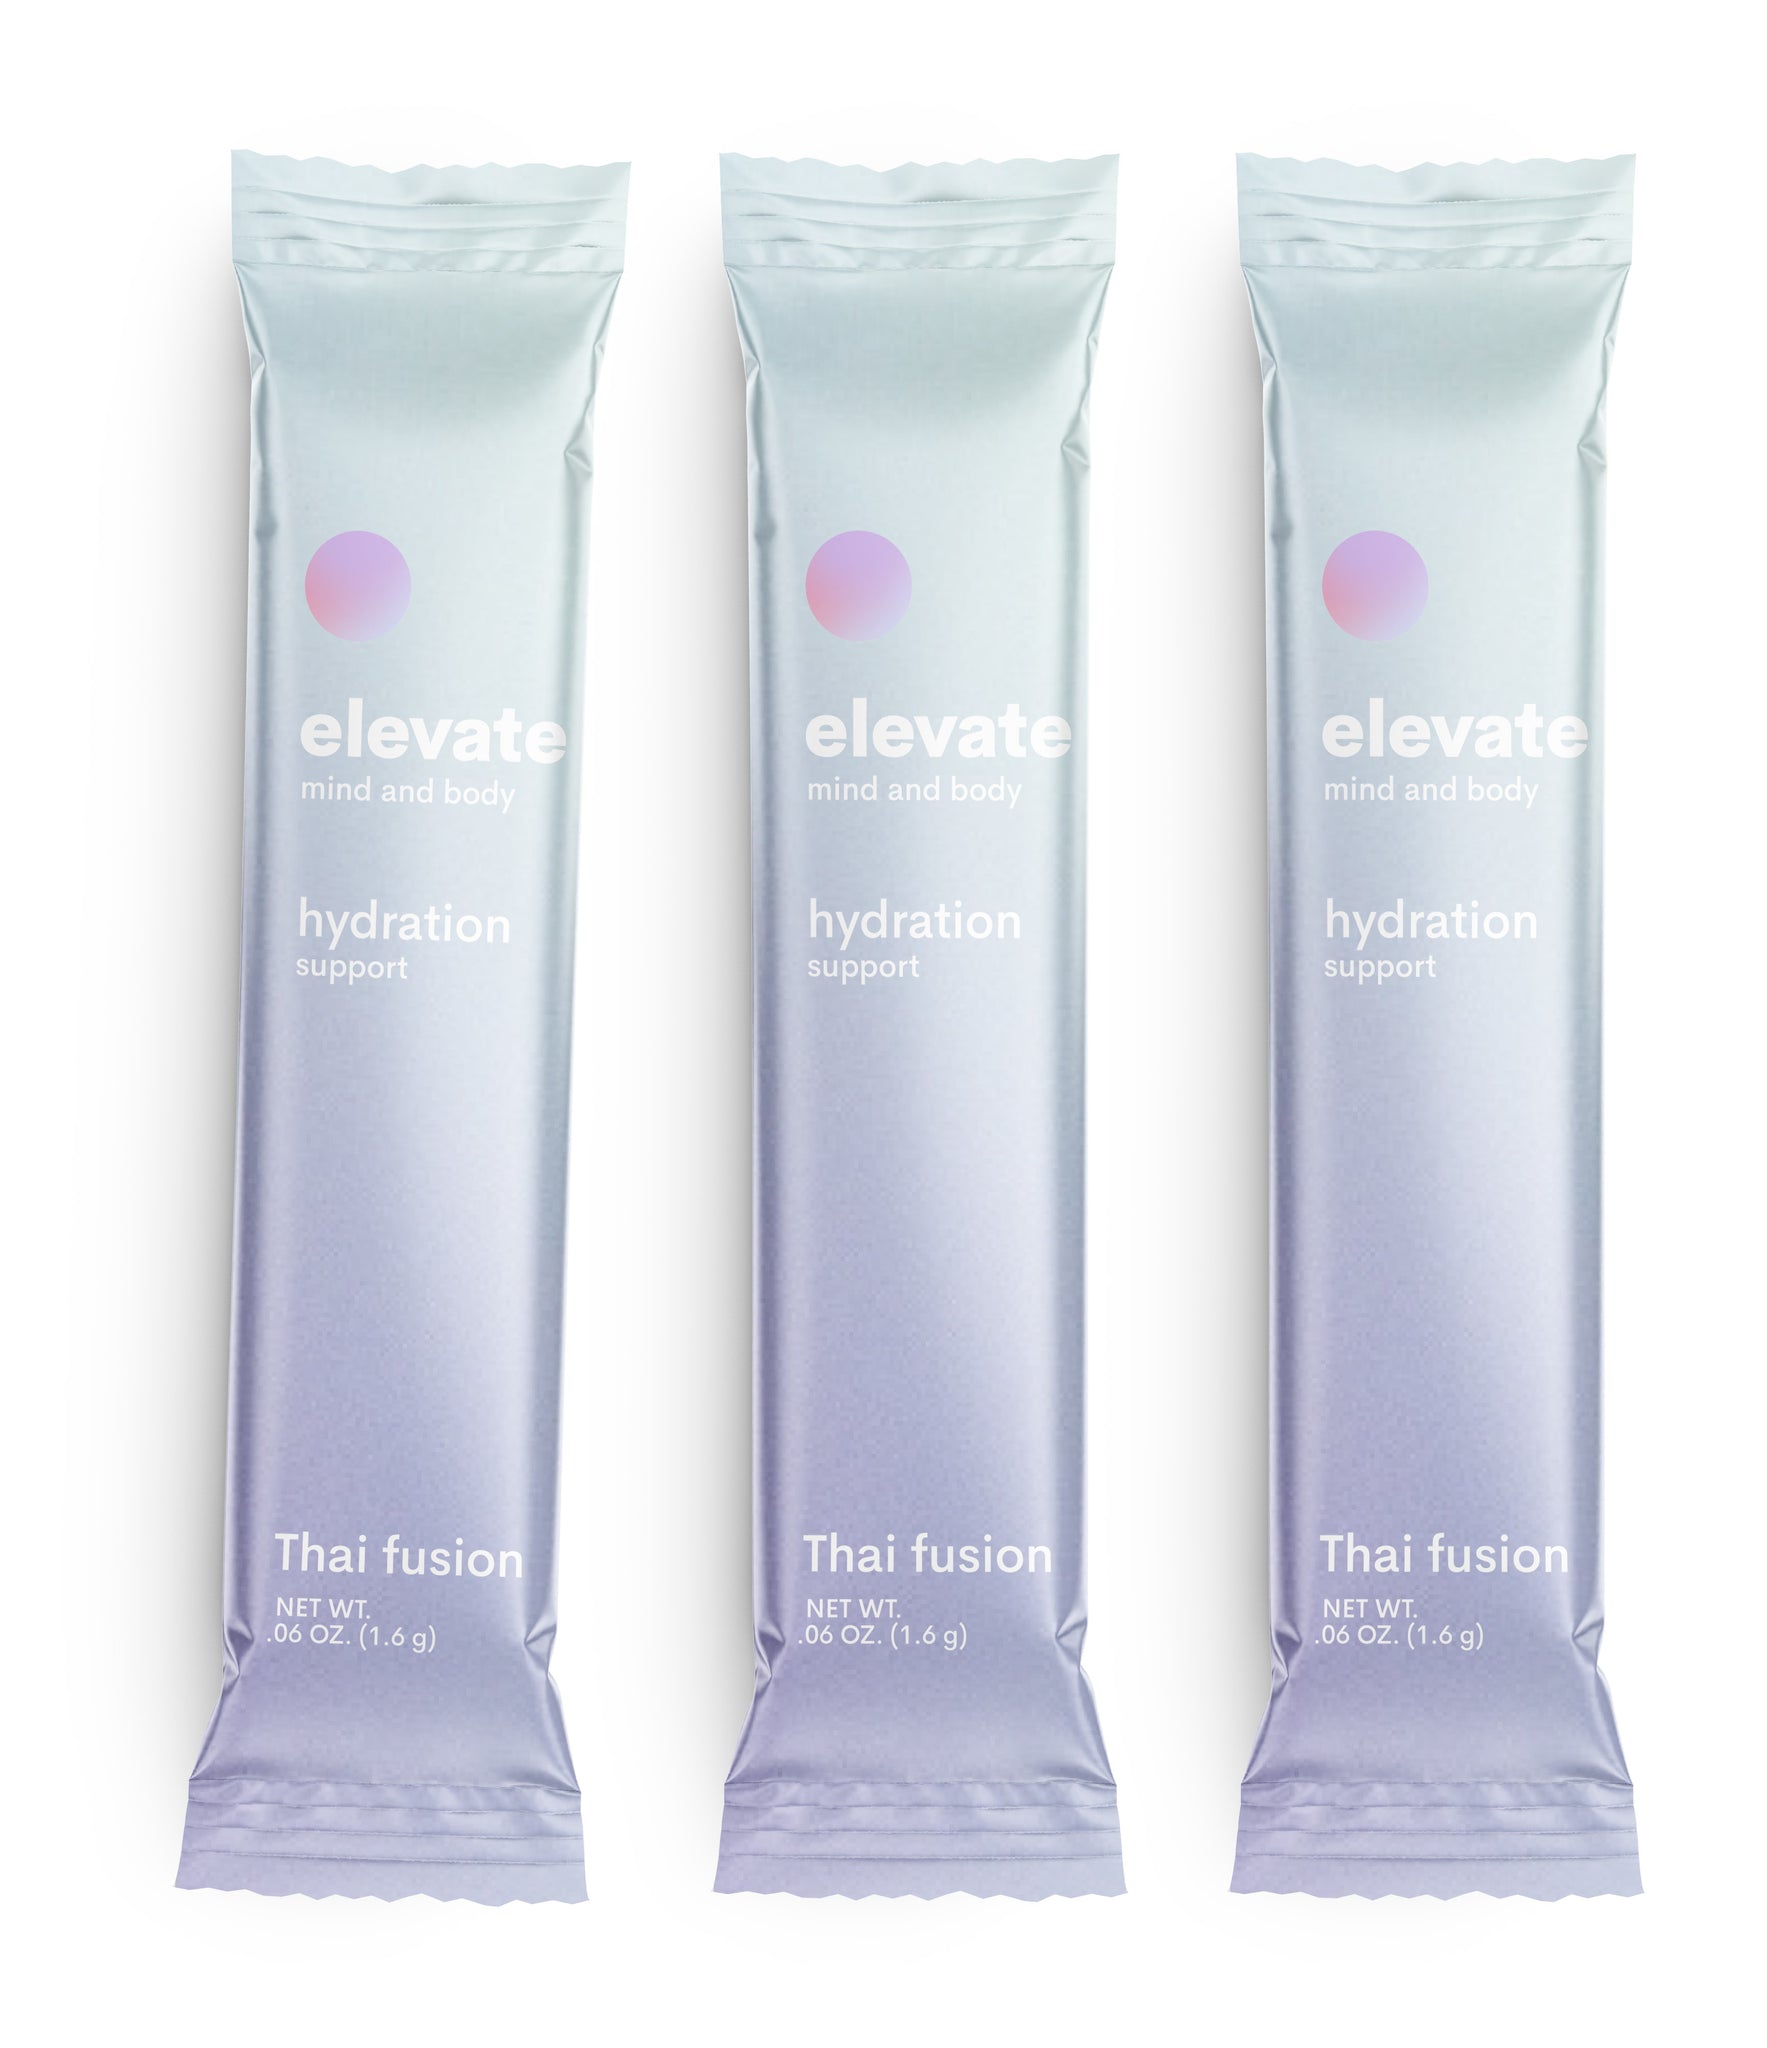 Elevate hydration support – 30 day supply